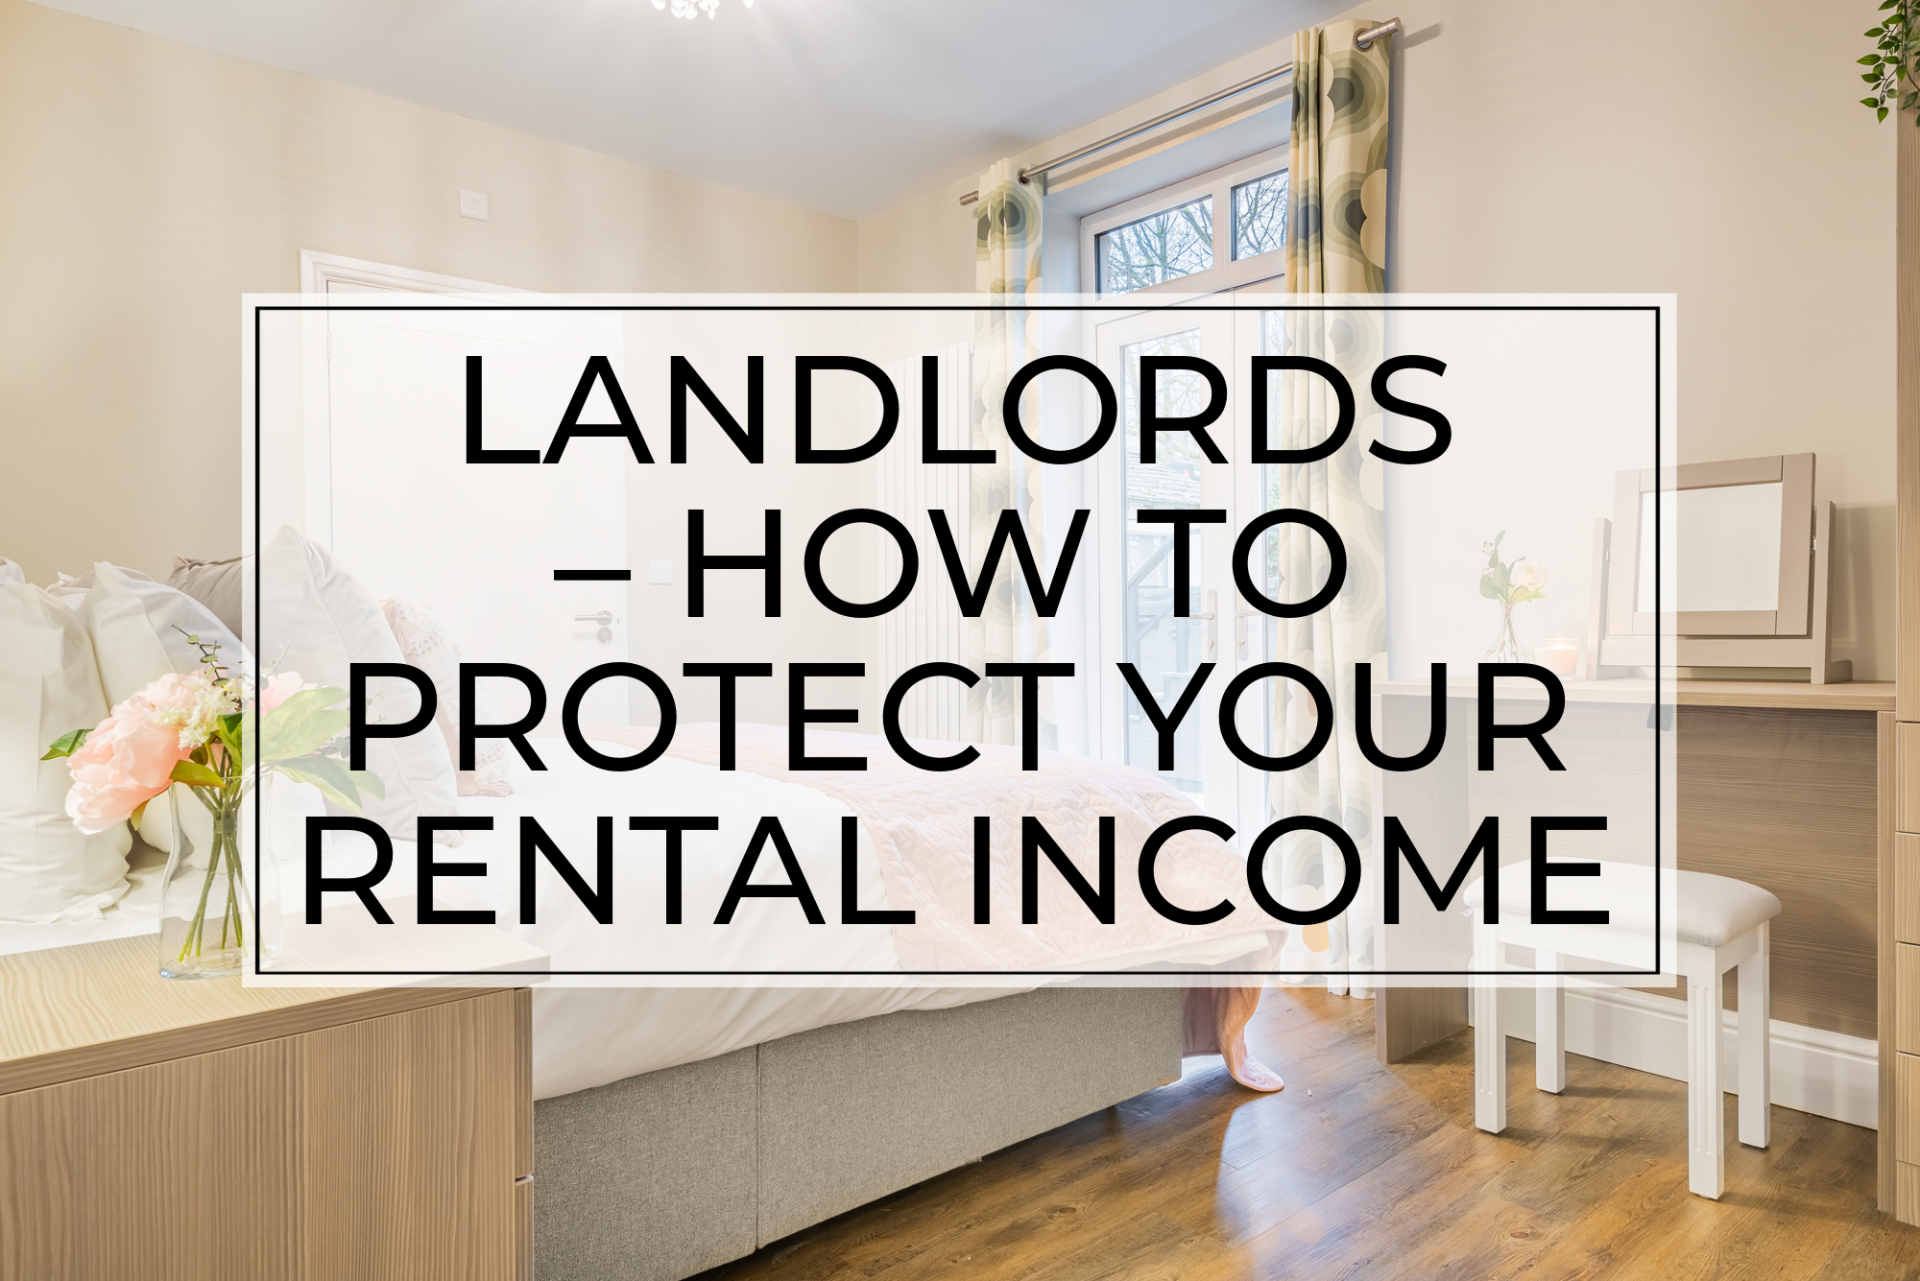 Landlords – how to protect your rental income